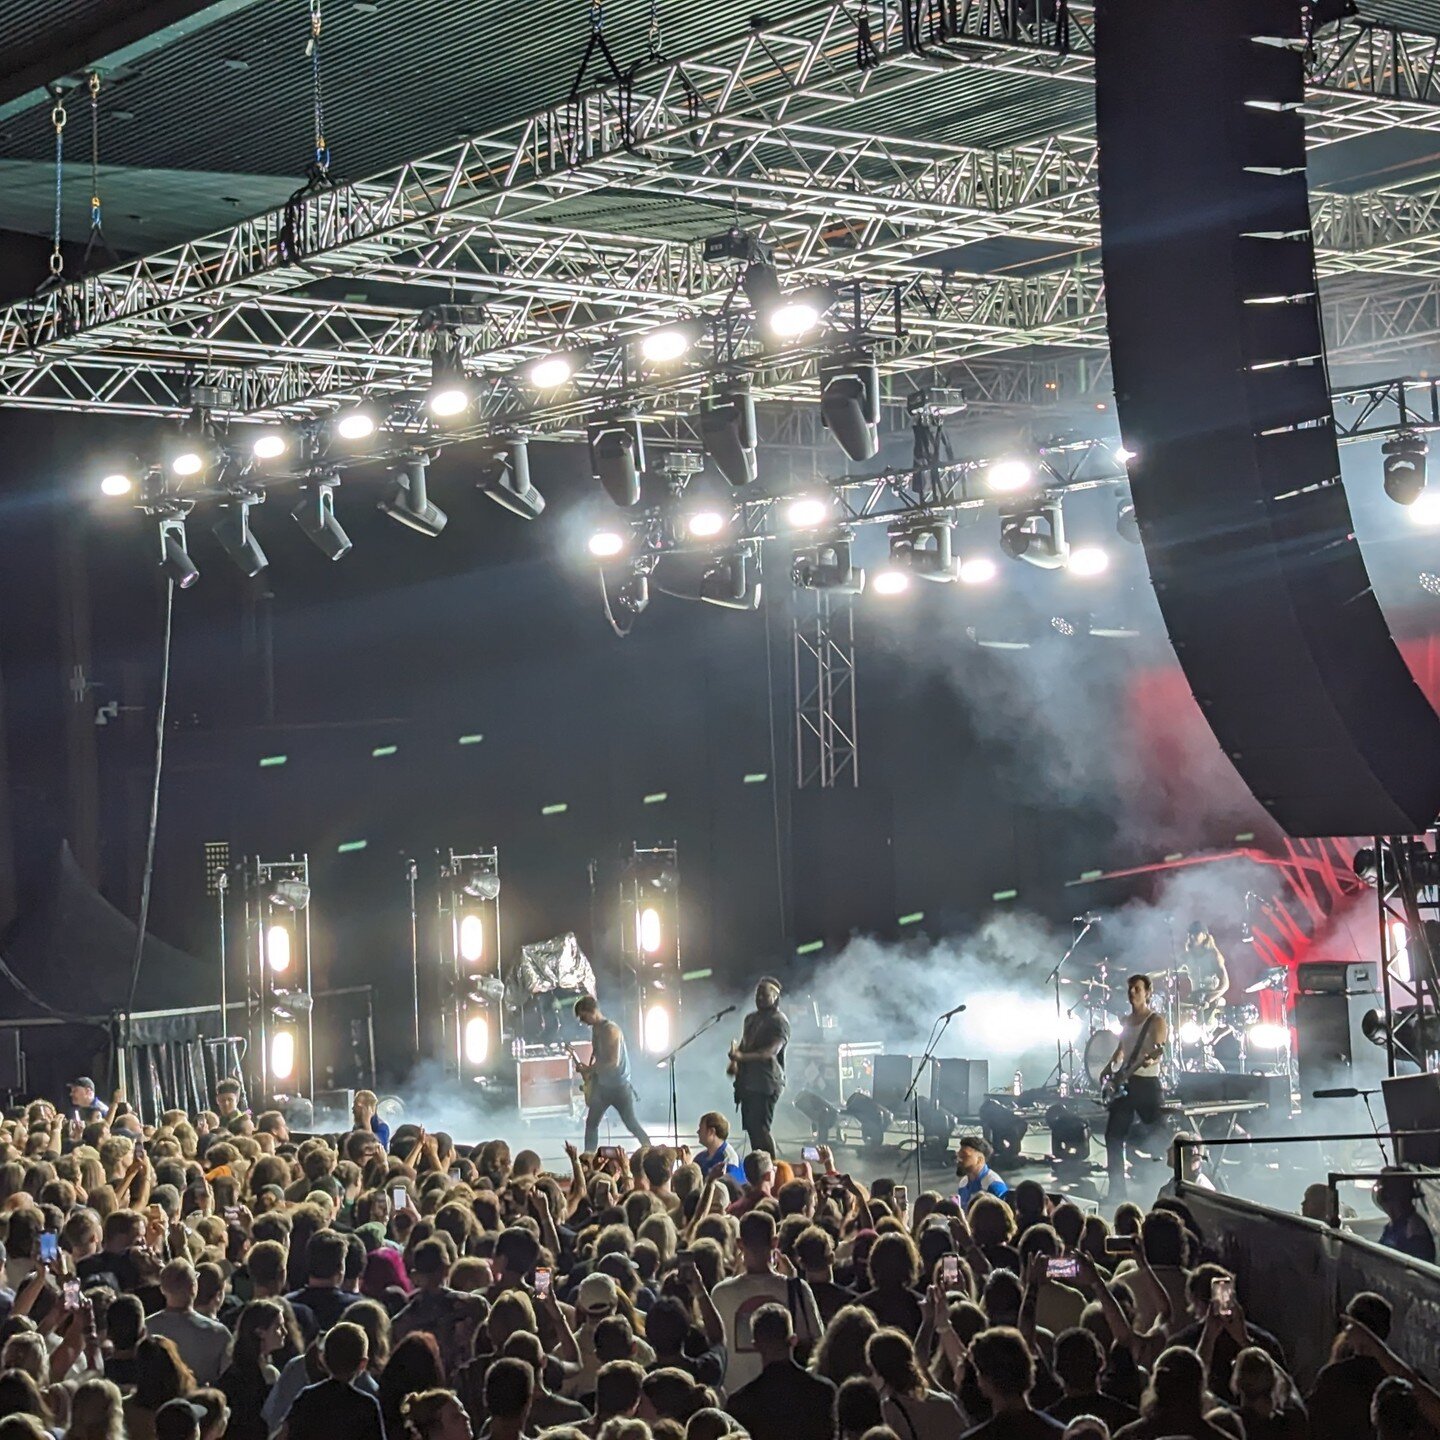 We were pumped to party with @thisisblocparty and @interpol for their East Coast tour of Australia last week. Thanks to @destroyalllines for having us. @ayrtondigital @chauvet_pro @ma_lighting_international @robelighting #strikem #ma3 #spiider #eurus